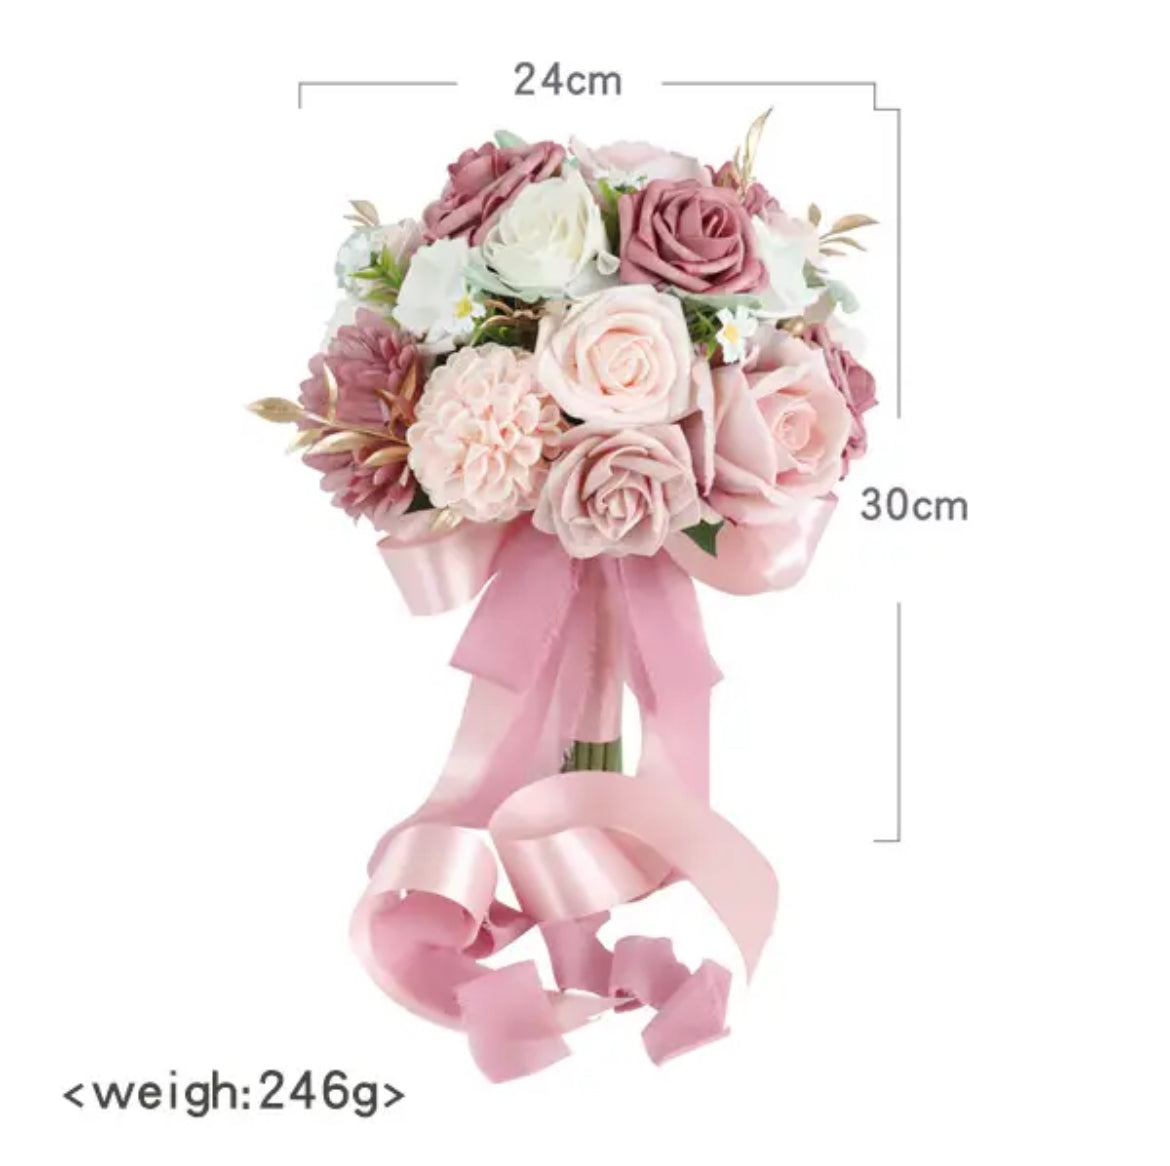 Dusty Rose Collection for Sale- Arch Swag and Table Floral Arrangement for Events - Easy to Use Ready Swag Decorations